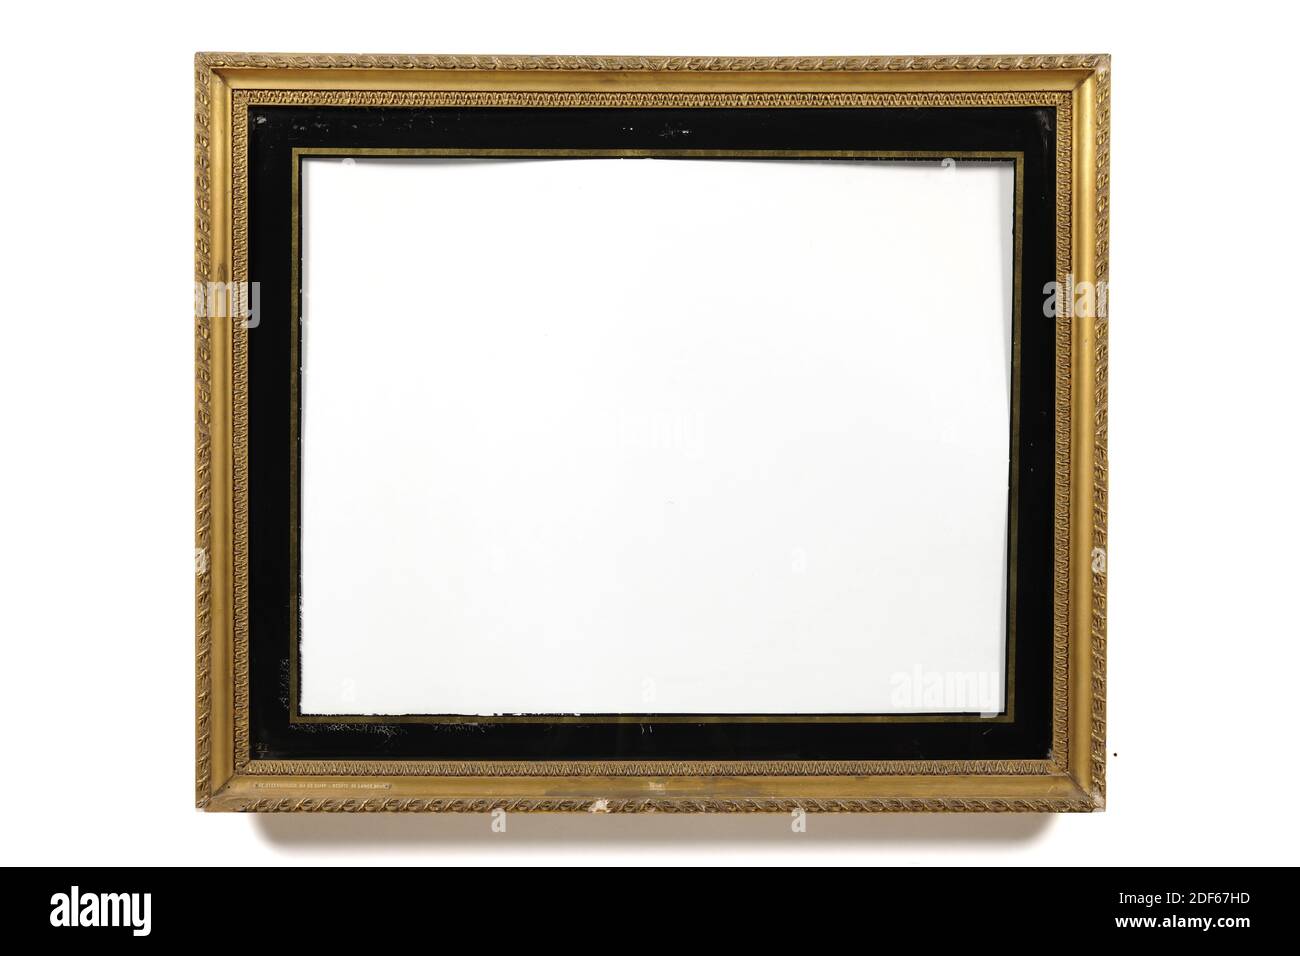 picture frame, Anonymous, after 1807, glass, plaster, gilding, wood, gilded, General: 77.5 x 92.2 x 4cm (775 x 922 x 40mm), Inner size: 69 x 85cm (690 x 850mm), Day frame size: 67 x 82cm (670 x 820mm), Daylight passe-partout: 57.2 x 72.3cm (572 x 723mm), Hollow gilded picture frame with a tulip edge in the inner frame. A twisted rim with leaves on the crown. The frame has a receding outer wall. A black passe-partout is painted on the glass, with a narrow gold-colored rim, 1880 Stock Photo